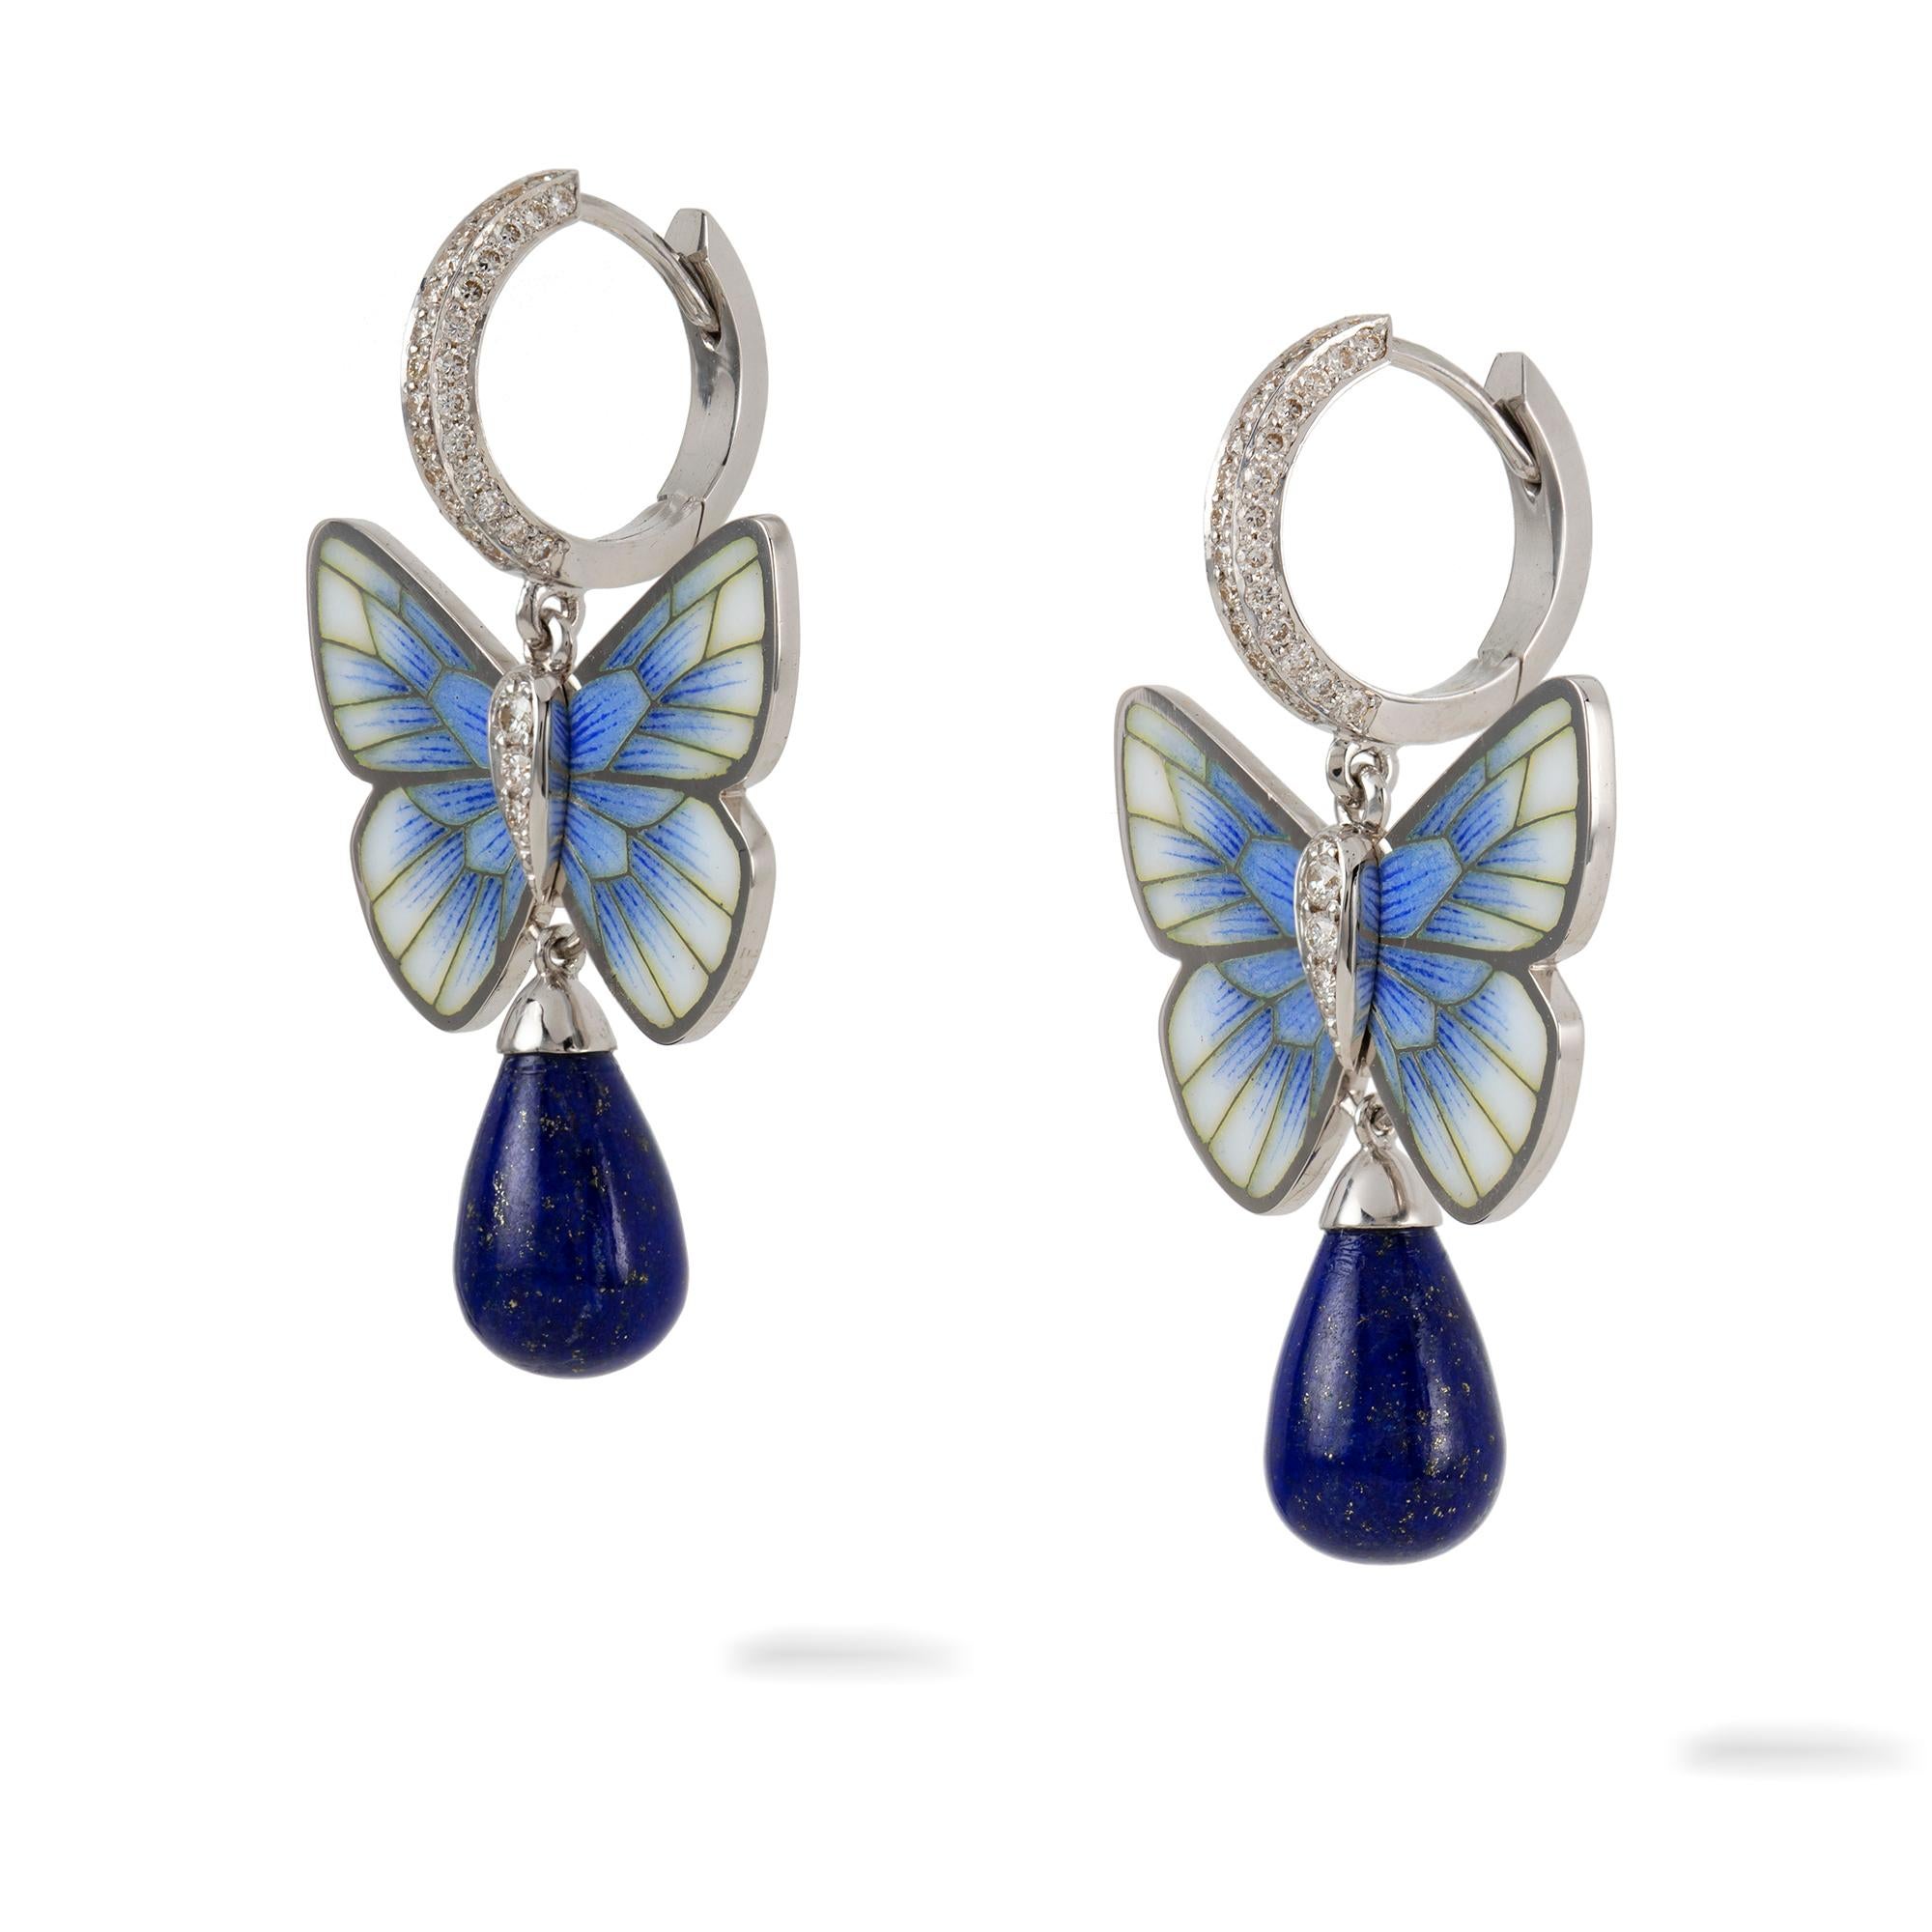 A pair of lapis butterfly earrings by Ilgiz F, each earring with a champlevé enamelled butterfly, termination to a lapis drop, suspended by a diamond-set loop, the diamonds weighing 0.63 carats in total, all mounted in white gold made by Ilgiz